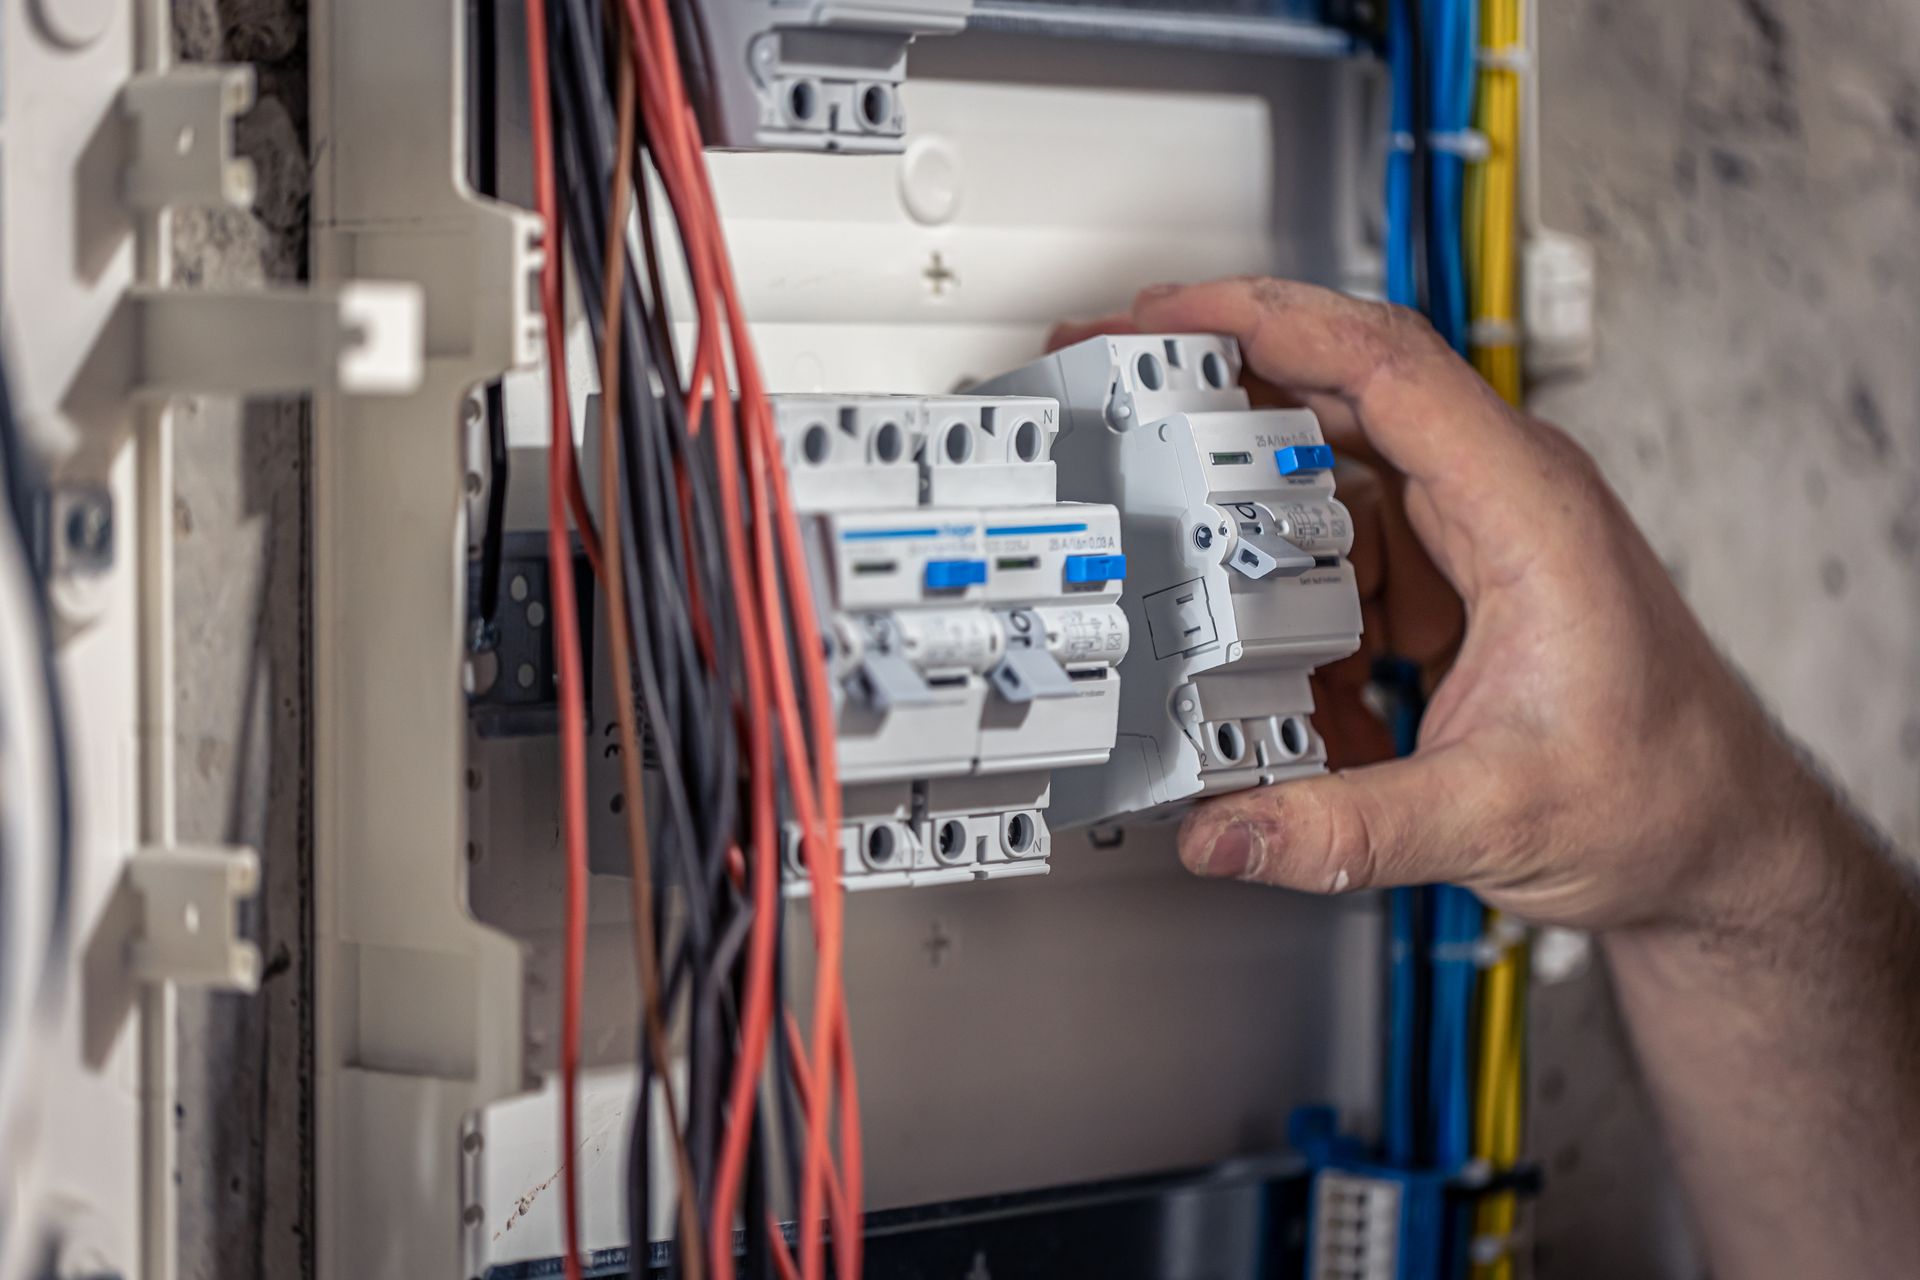 A person is holding a circuit breaker in their hand.